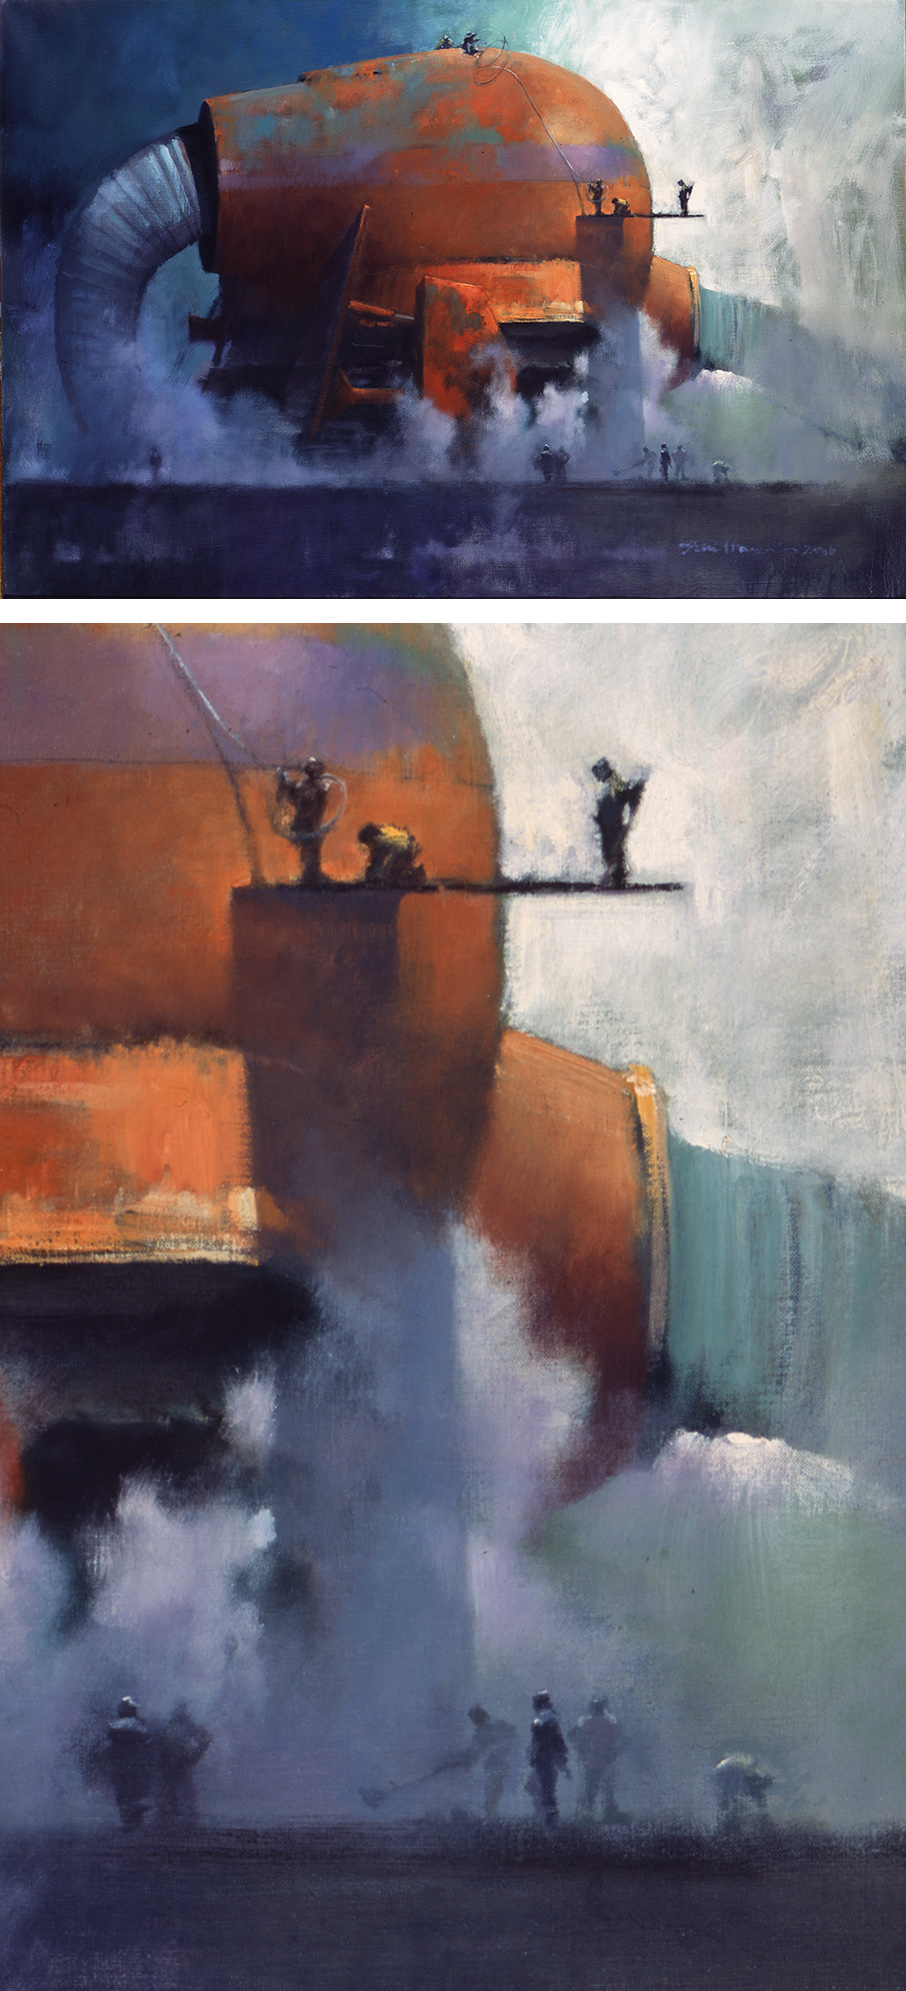 John Harris | Fire: Cleaning the Ducts